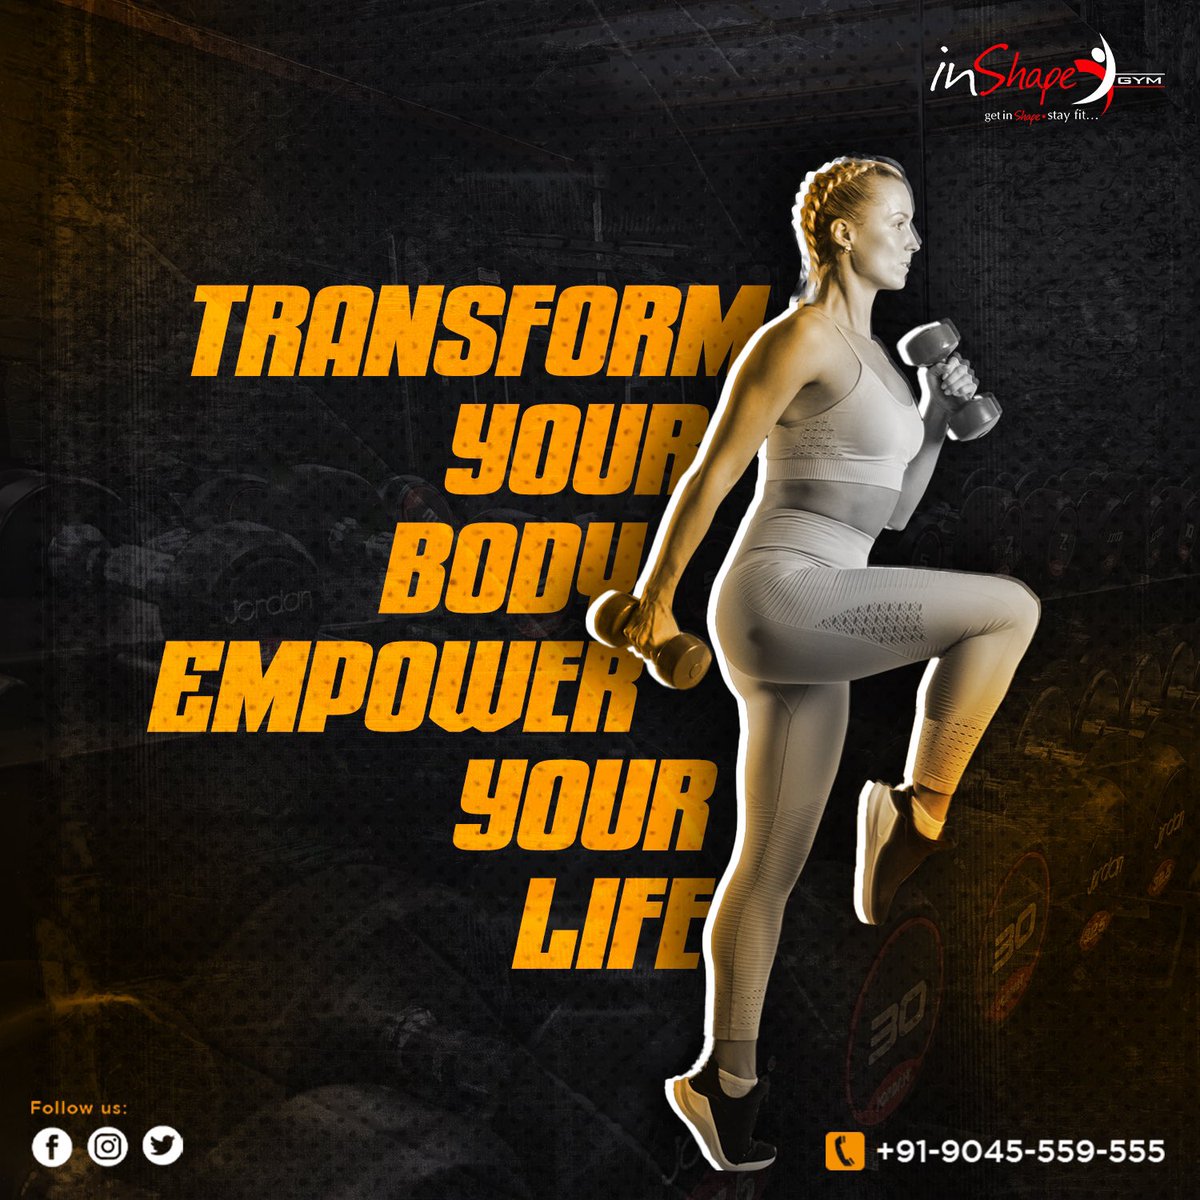 Transform your body, empower your life.   At Inshape Gym, we'll help you reach your fitness goals in a supportive and motivating environment.  Join us today and start your journey to a healthier, happier you! 

#InshapeGym #MeerutGym #FitnessGoals #TransformYourBody